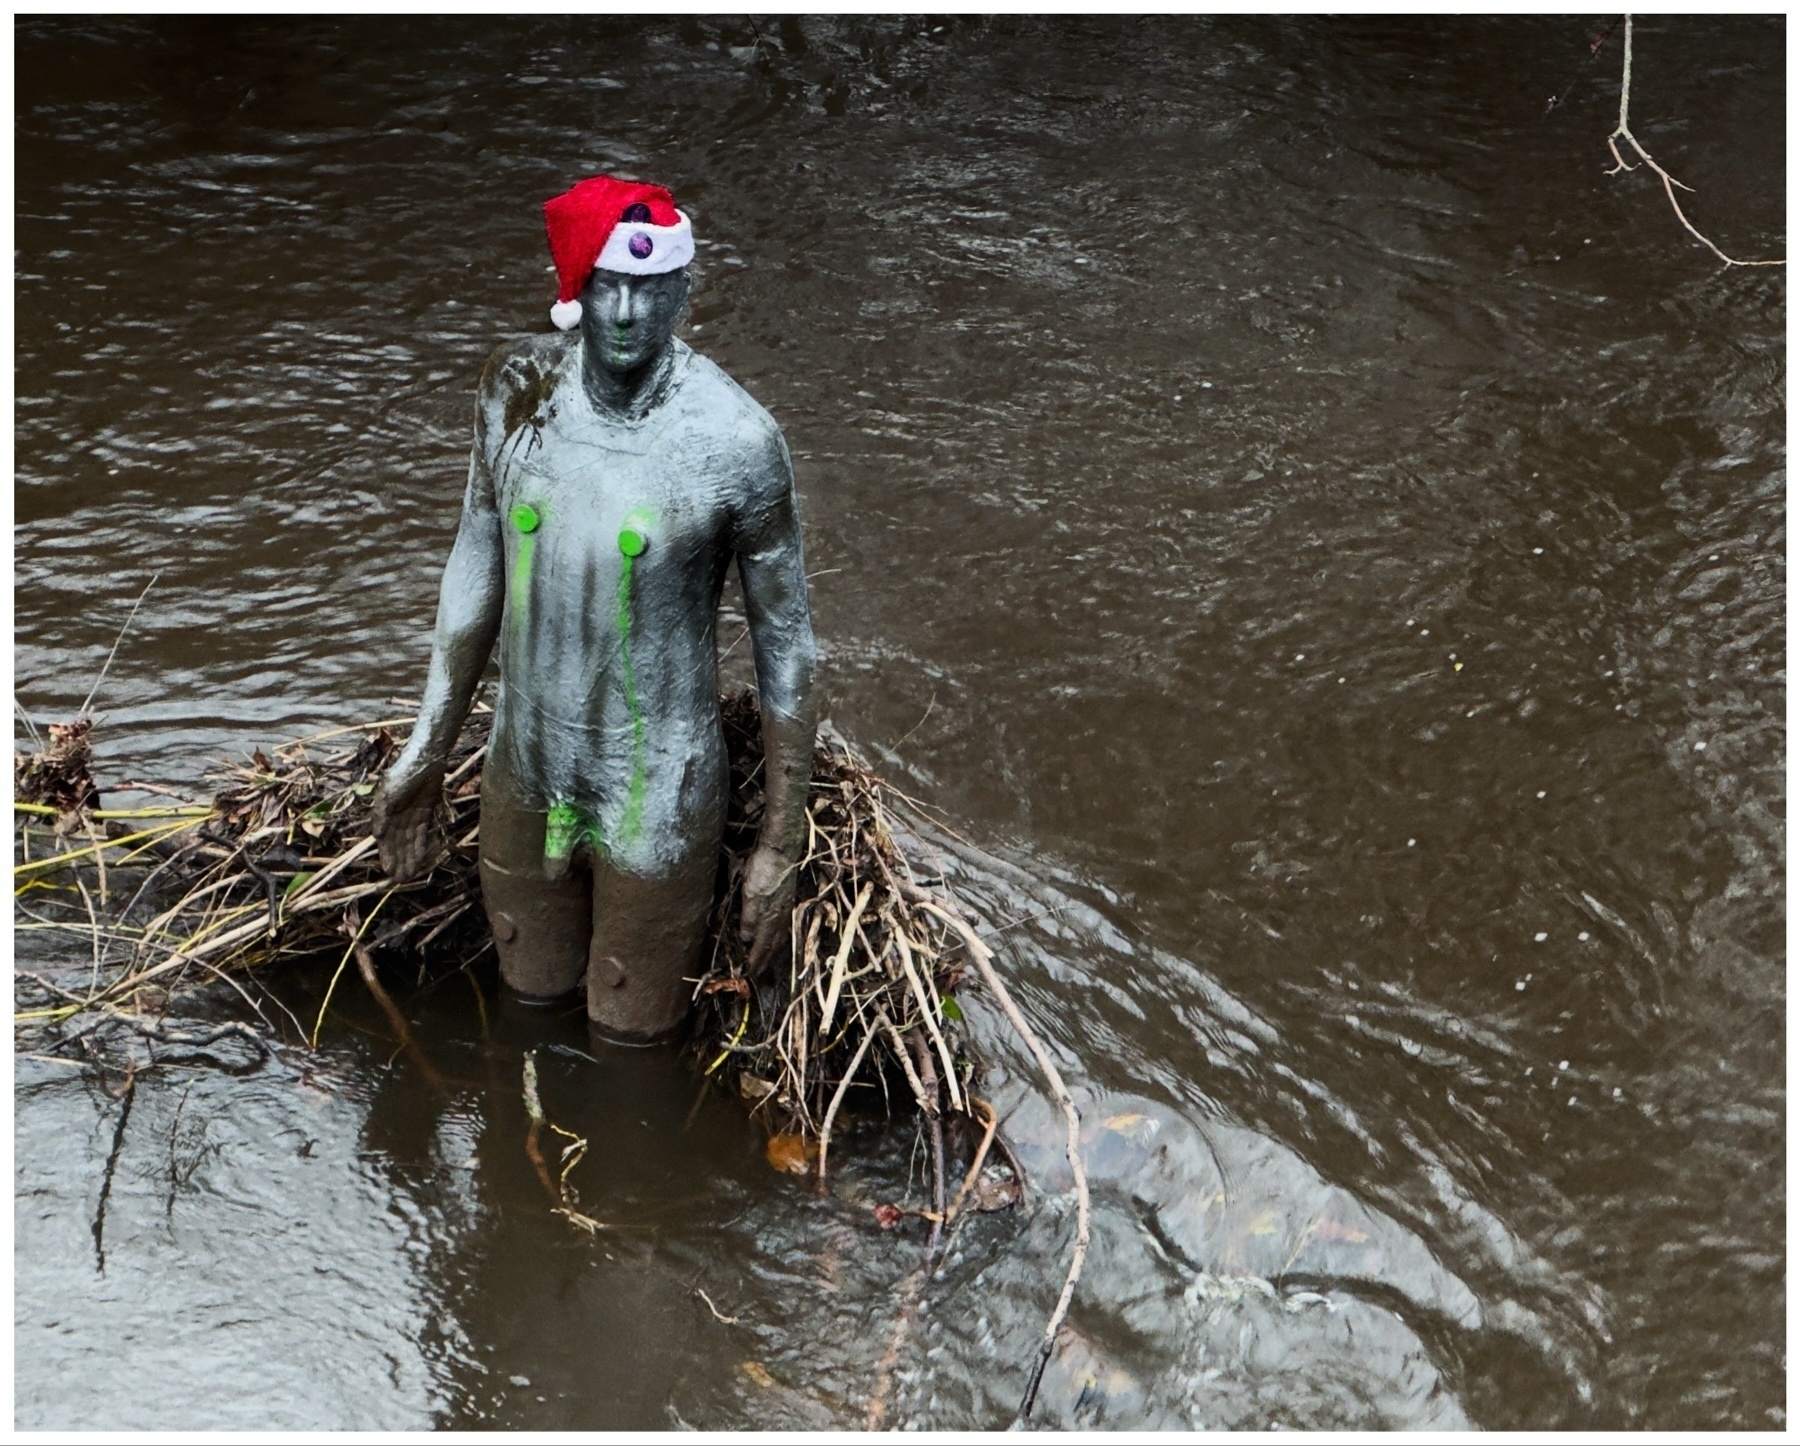 Statue of a person wearing a Santa hat, partially submerged in a river, with green algae-like markings on the body.